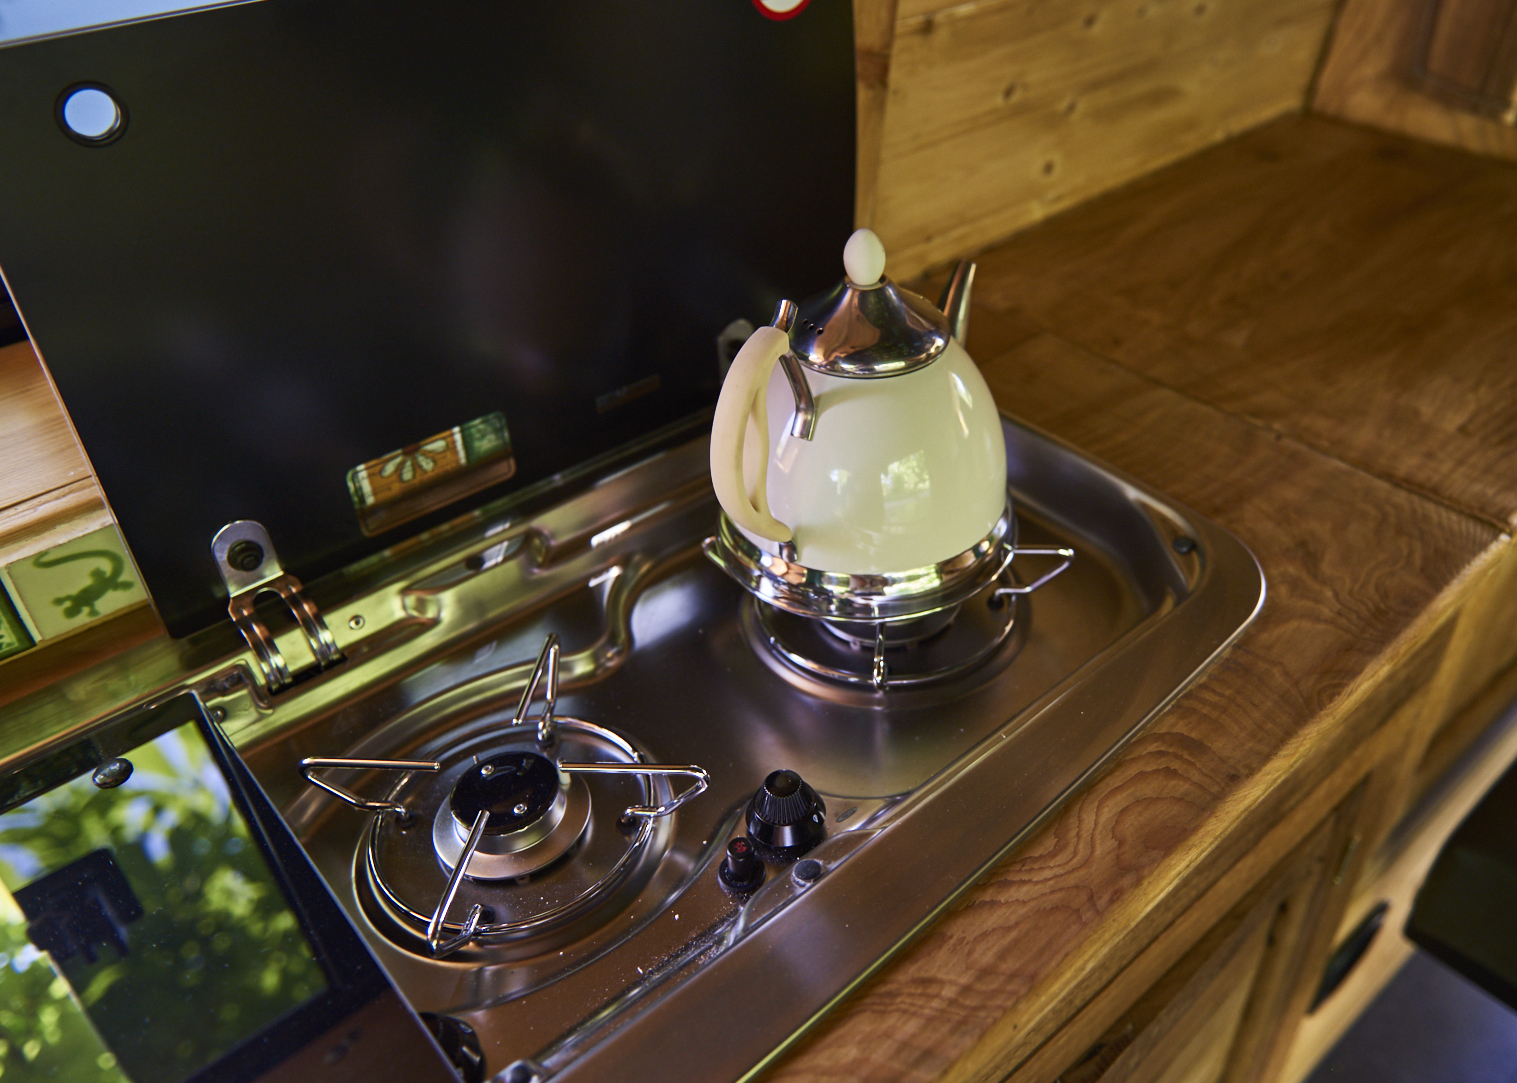 A compact kitchen setup inside a van features a stainless steel sink and a dual-burner gas stove. On one burner rests a vintage-style white and silver kettle. The surrounding wooden countertop has a natural finish, enhancing the cozy, mobile living space ambiance.